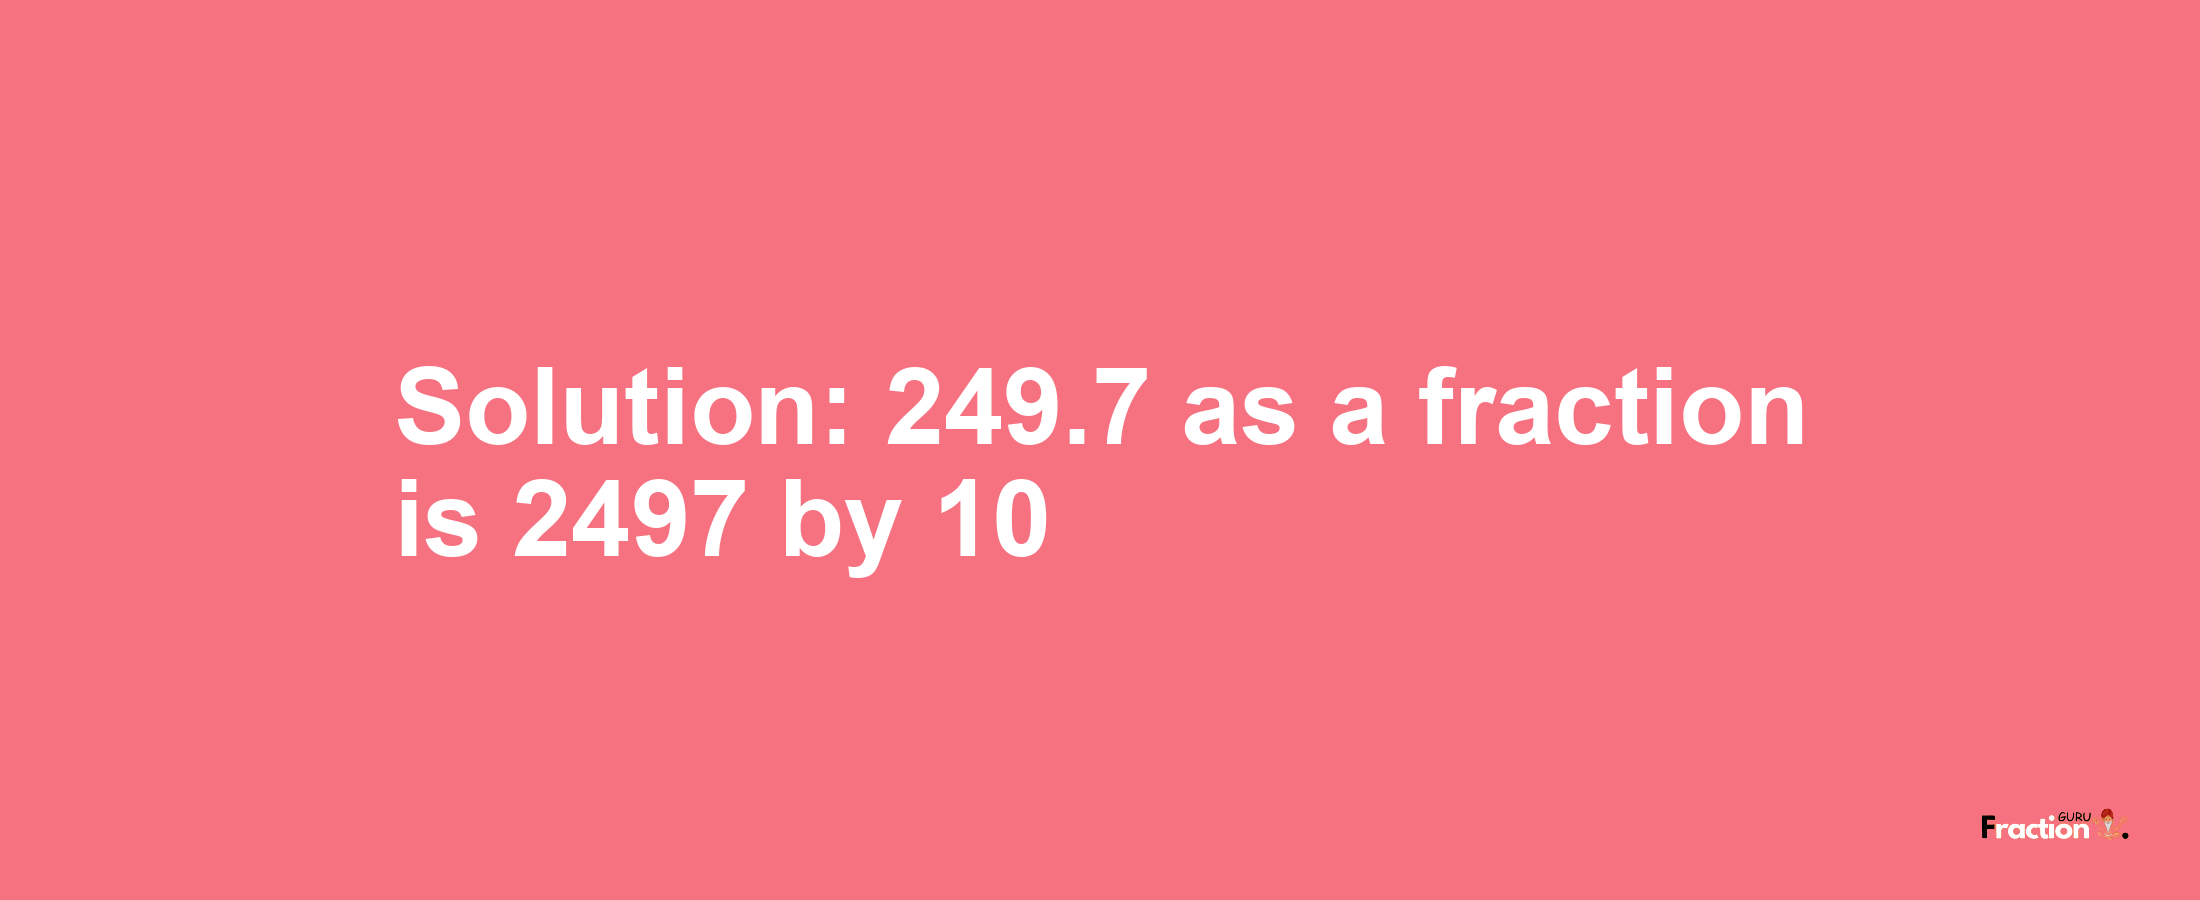 Solution:249.7 as a fraction is 2497/10